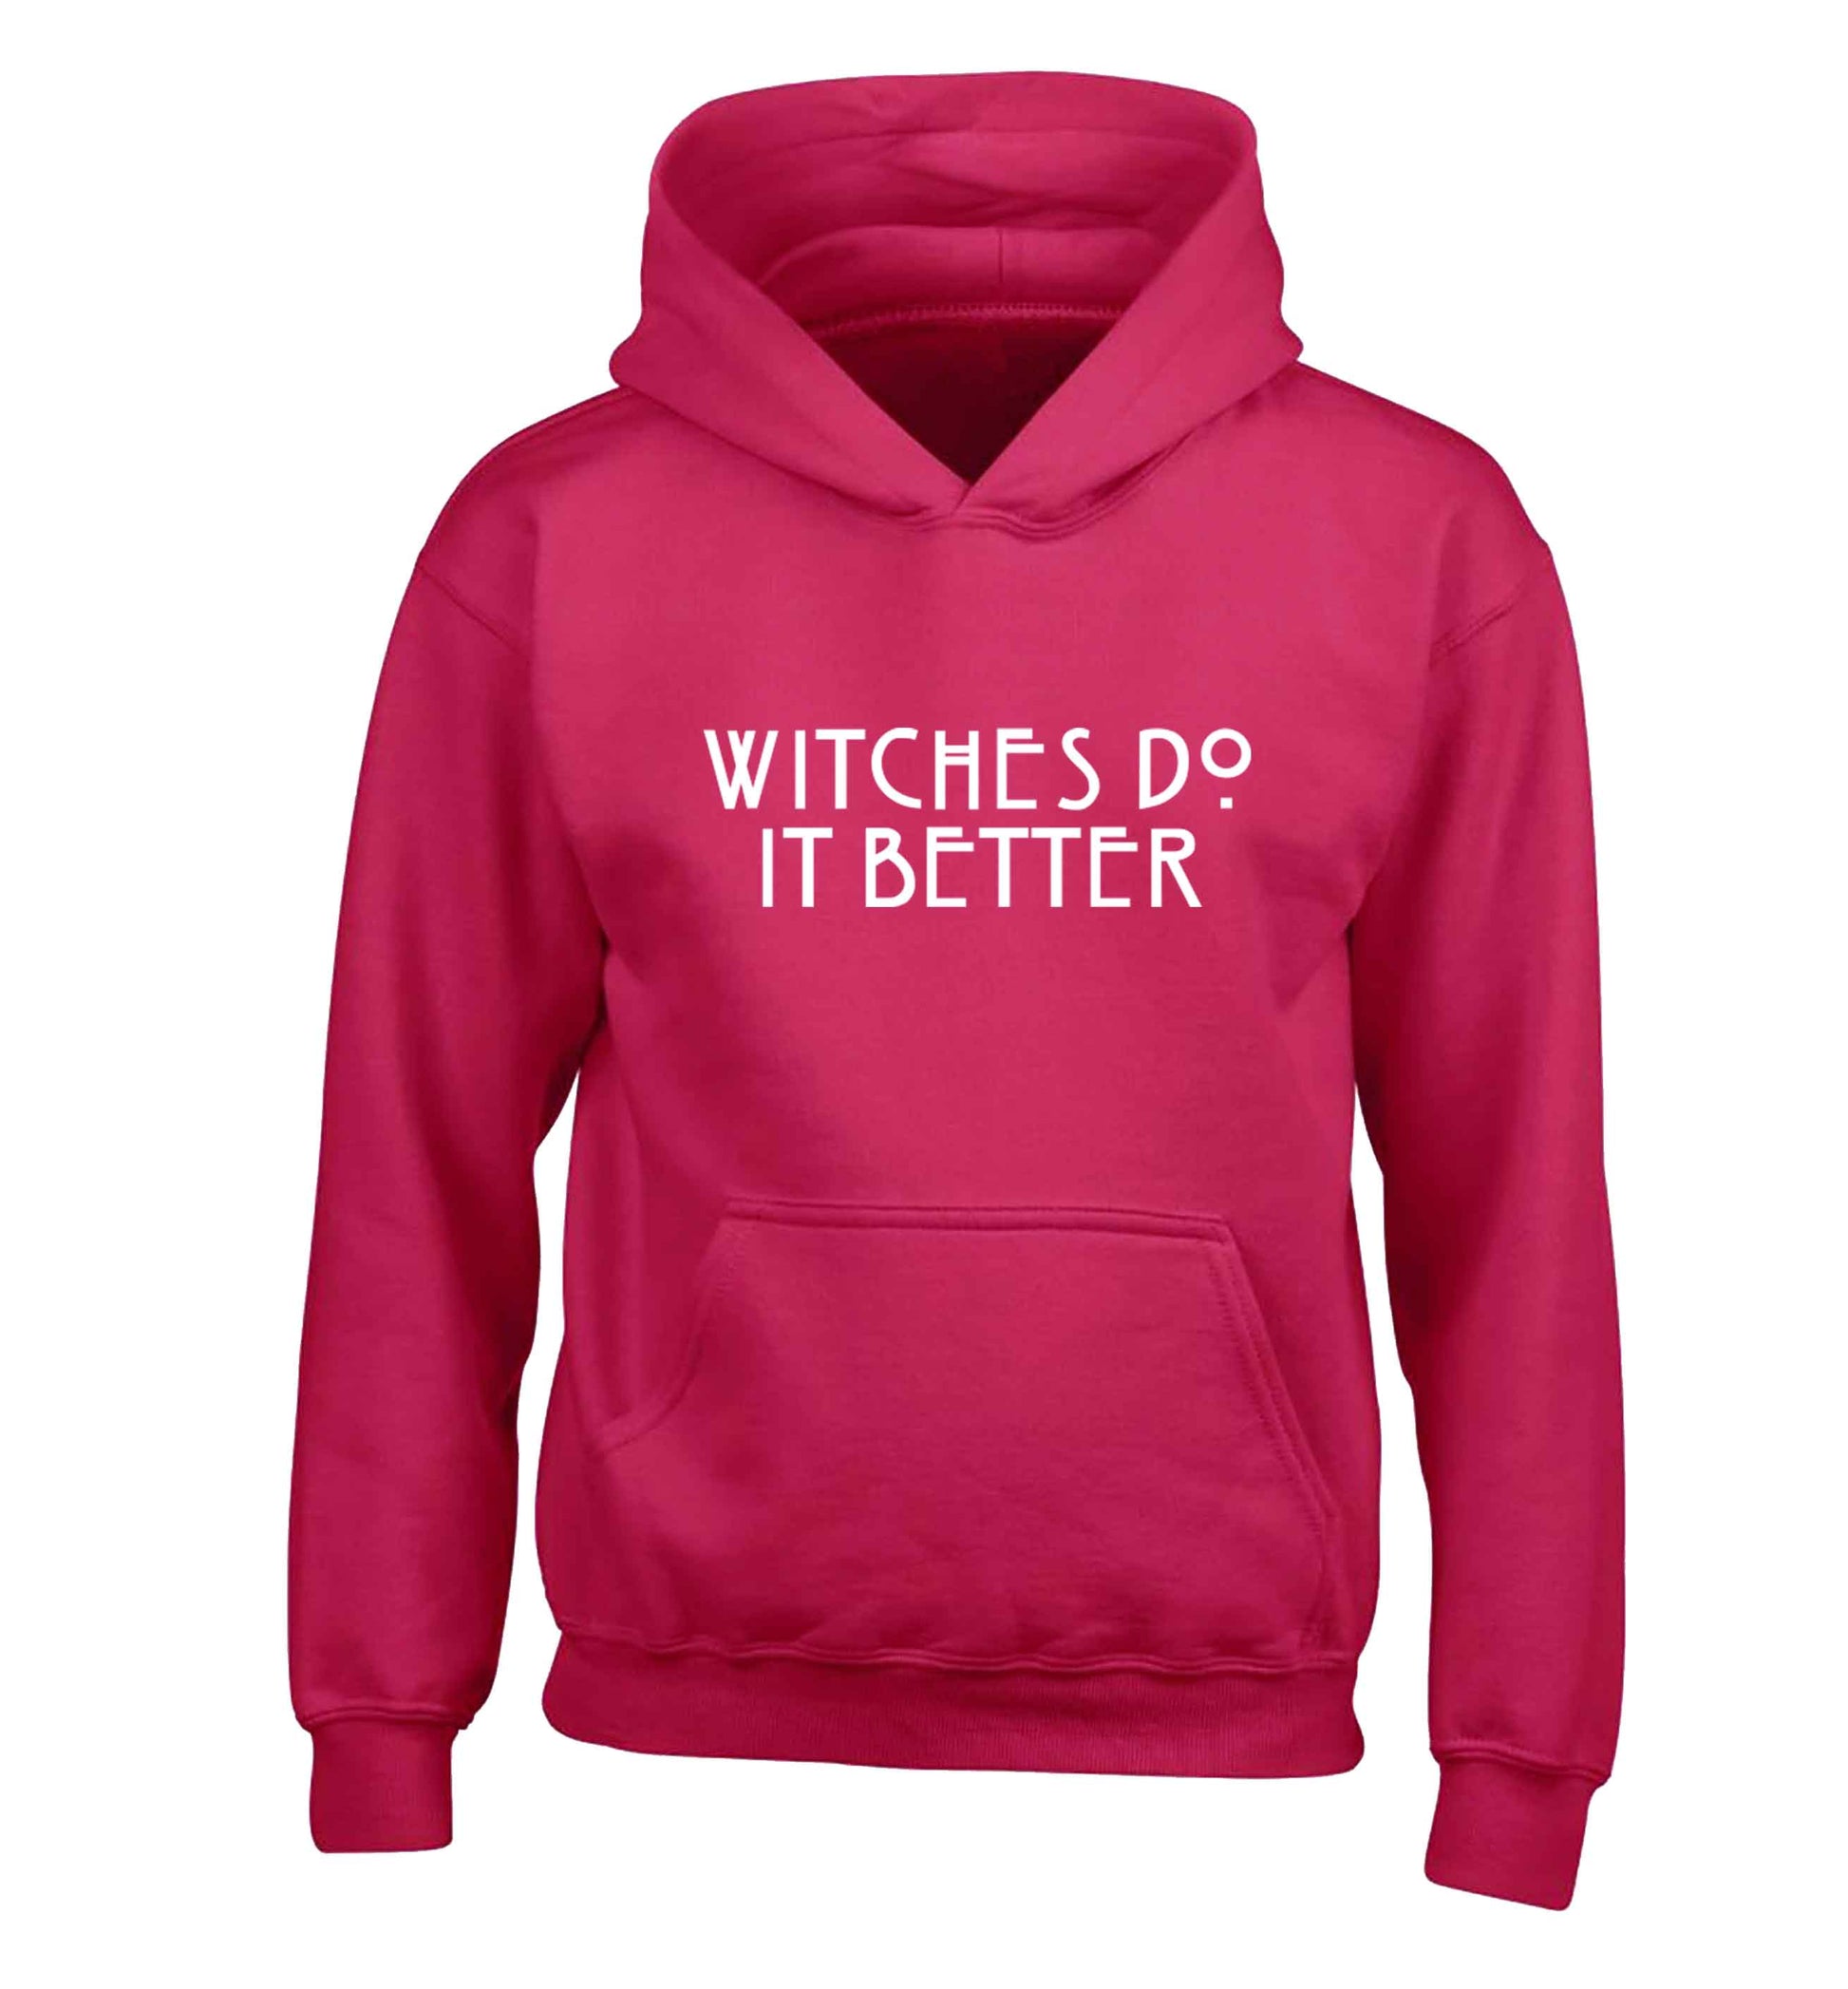 Witches do it better children's pink hoodie 12-13 Years